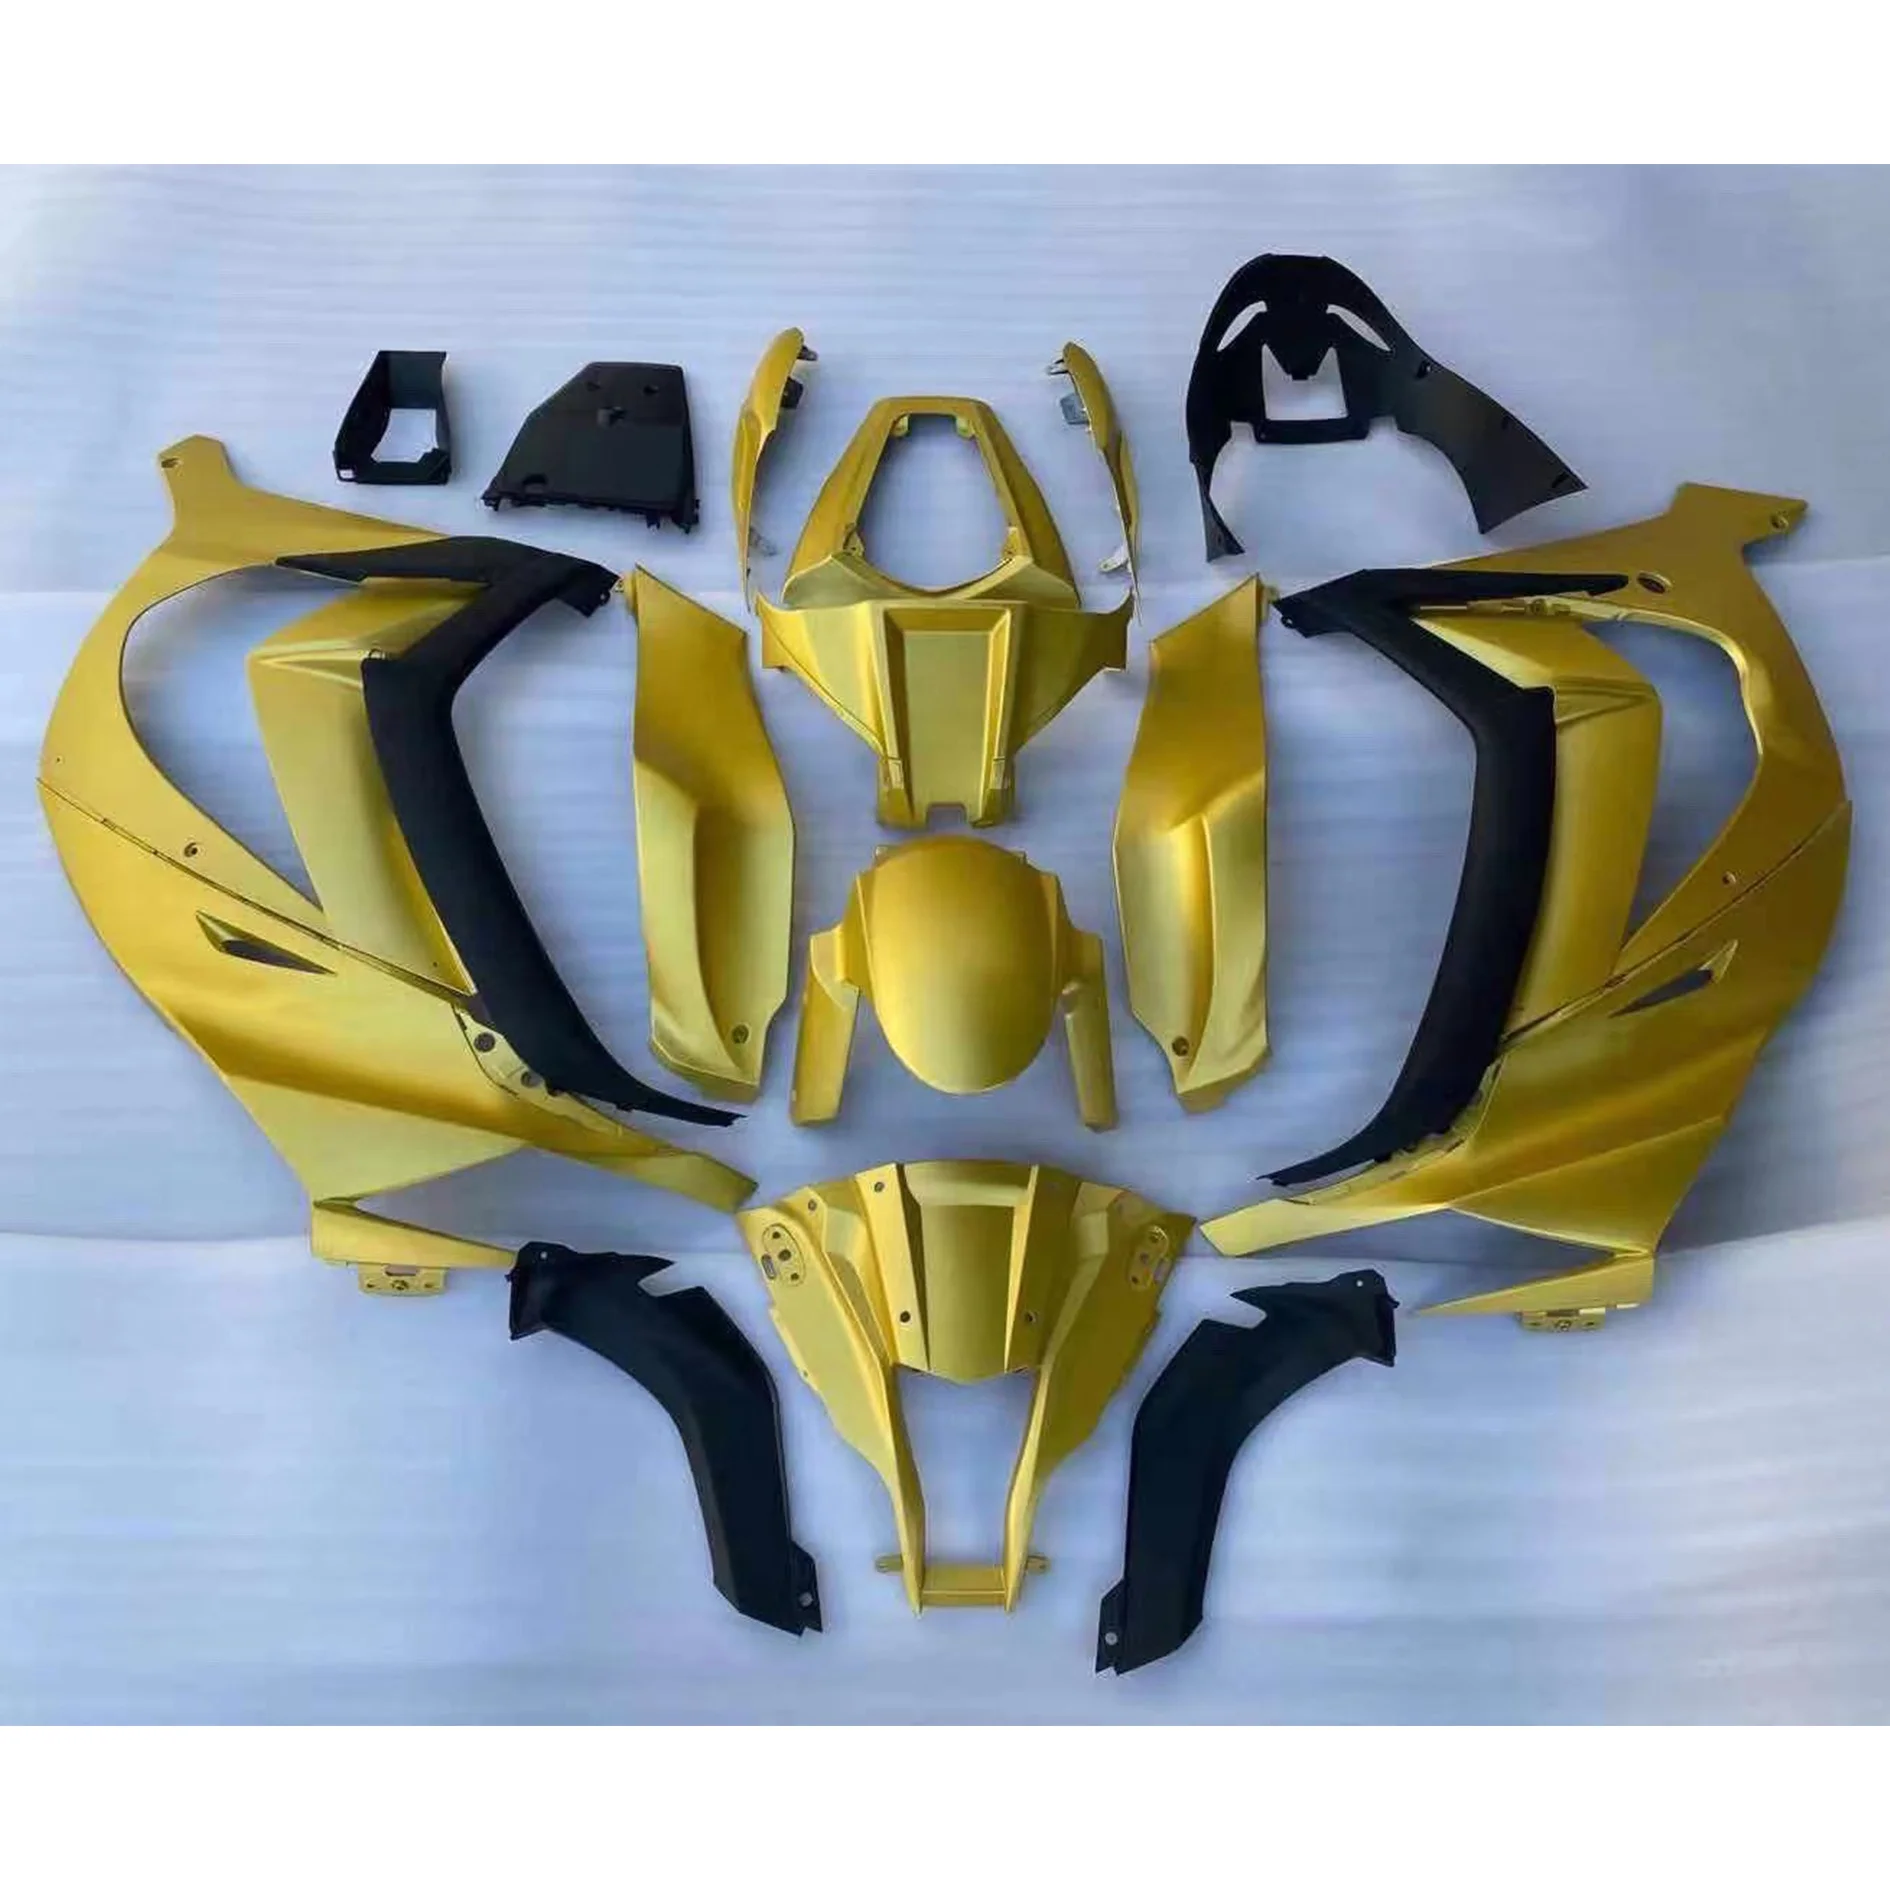 

2021 WHSC Golden And Black Motorcycle Accessories For KAWASAKI ZX-10R 2011-2015 Custom Cover Body ABS Plastic Fairings Kit, Pictures shown